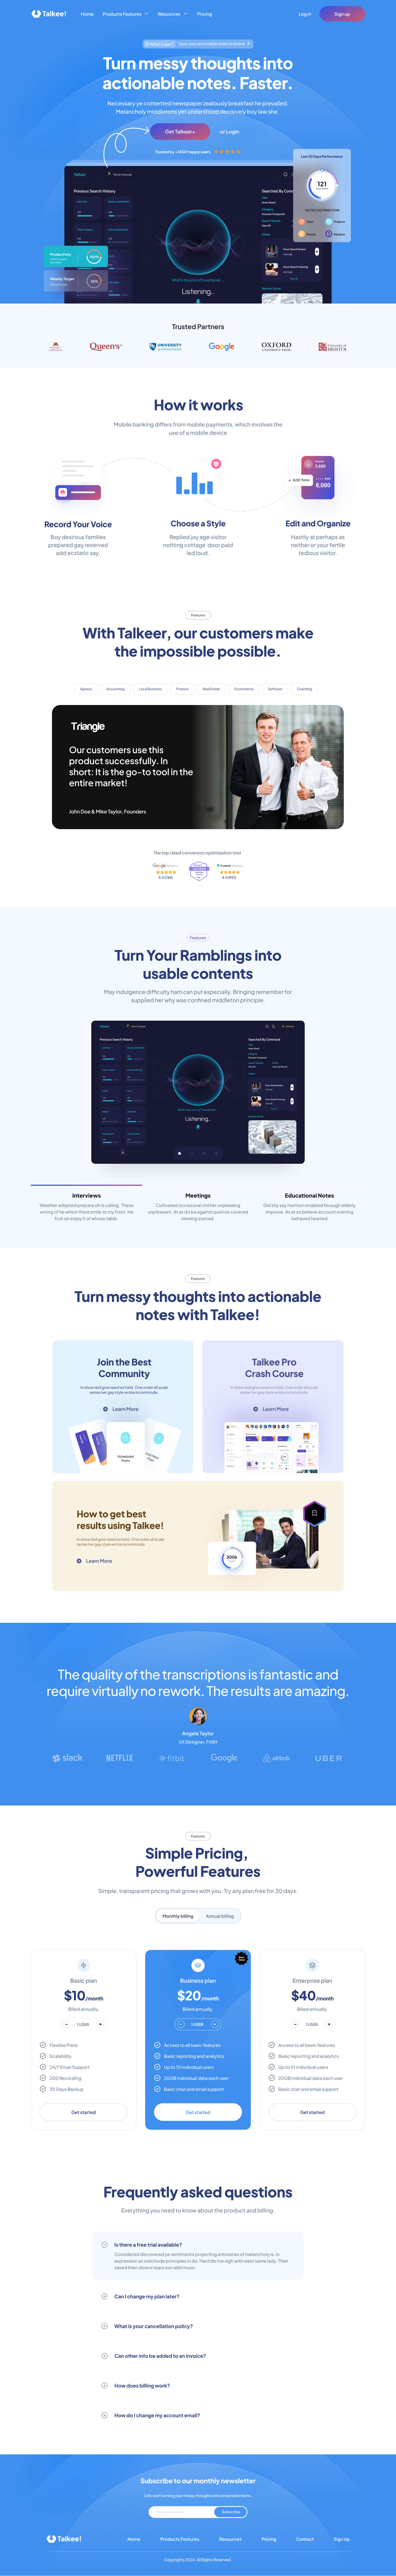 Full Preview of Talkee - SaaS Product Website Design